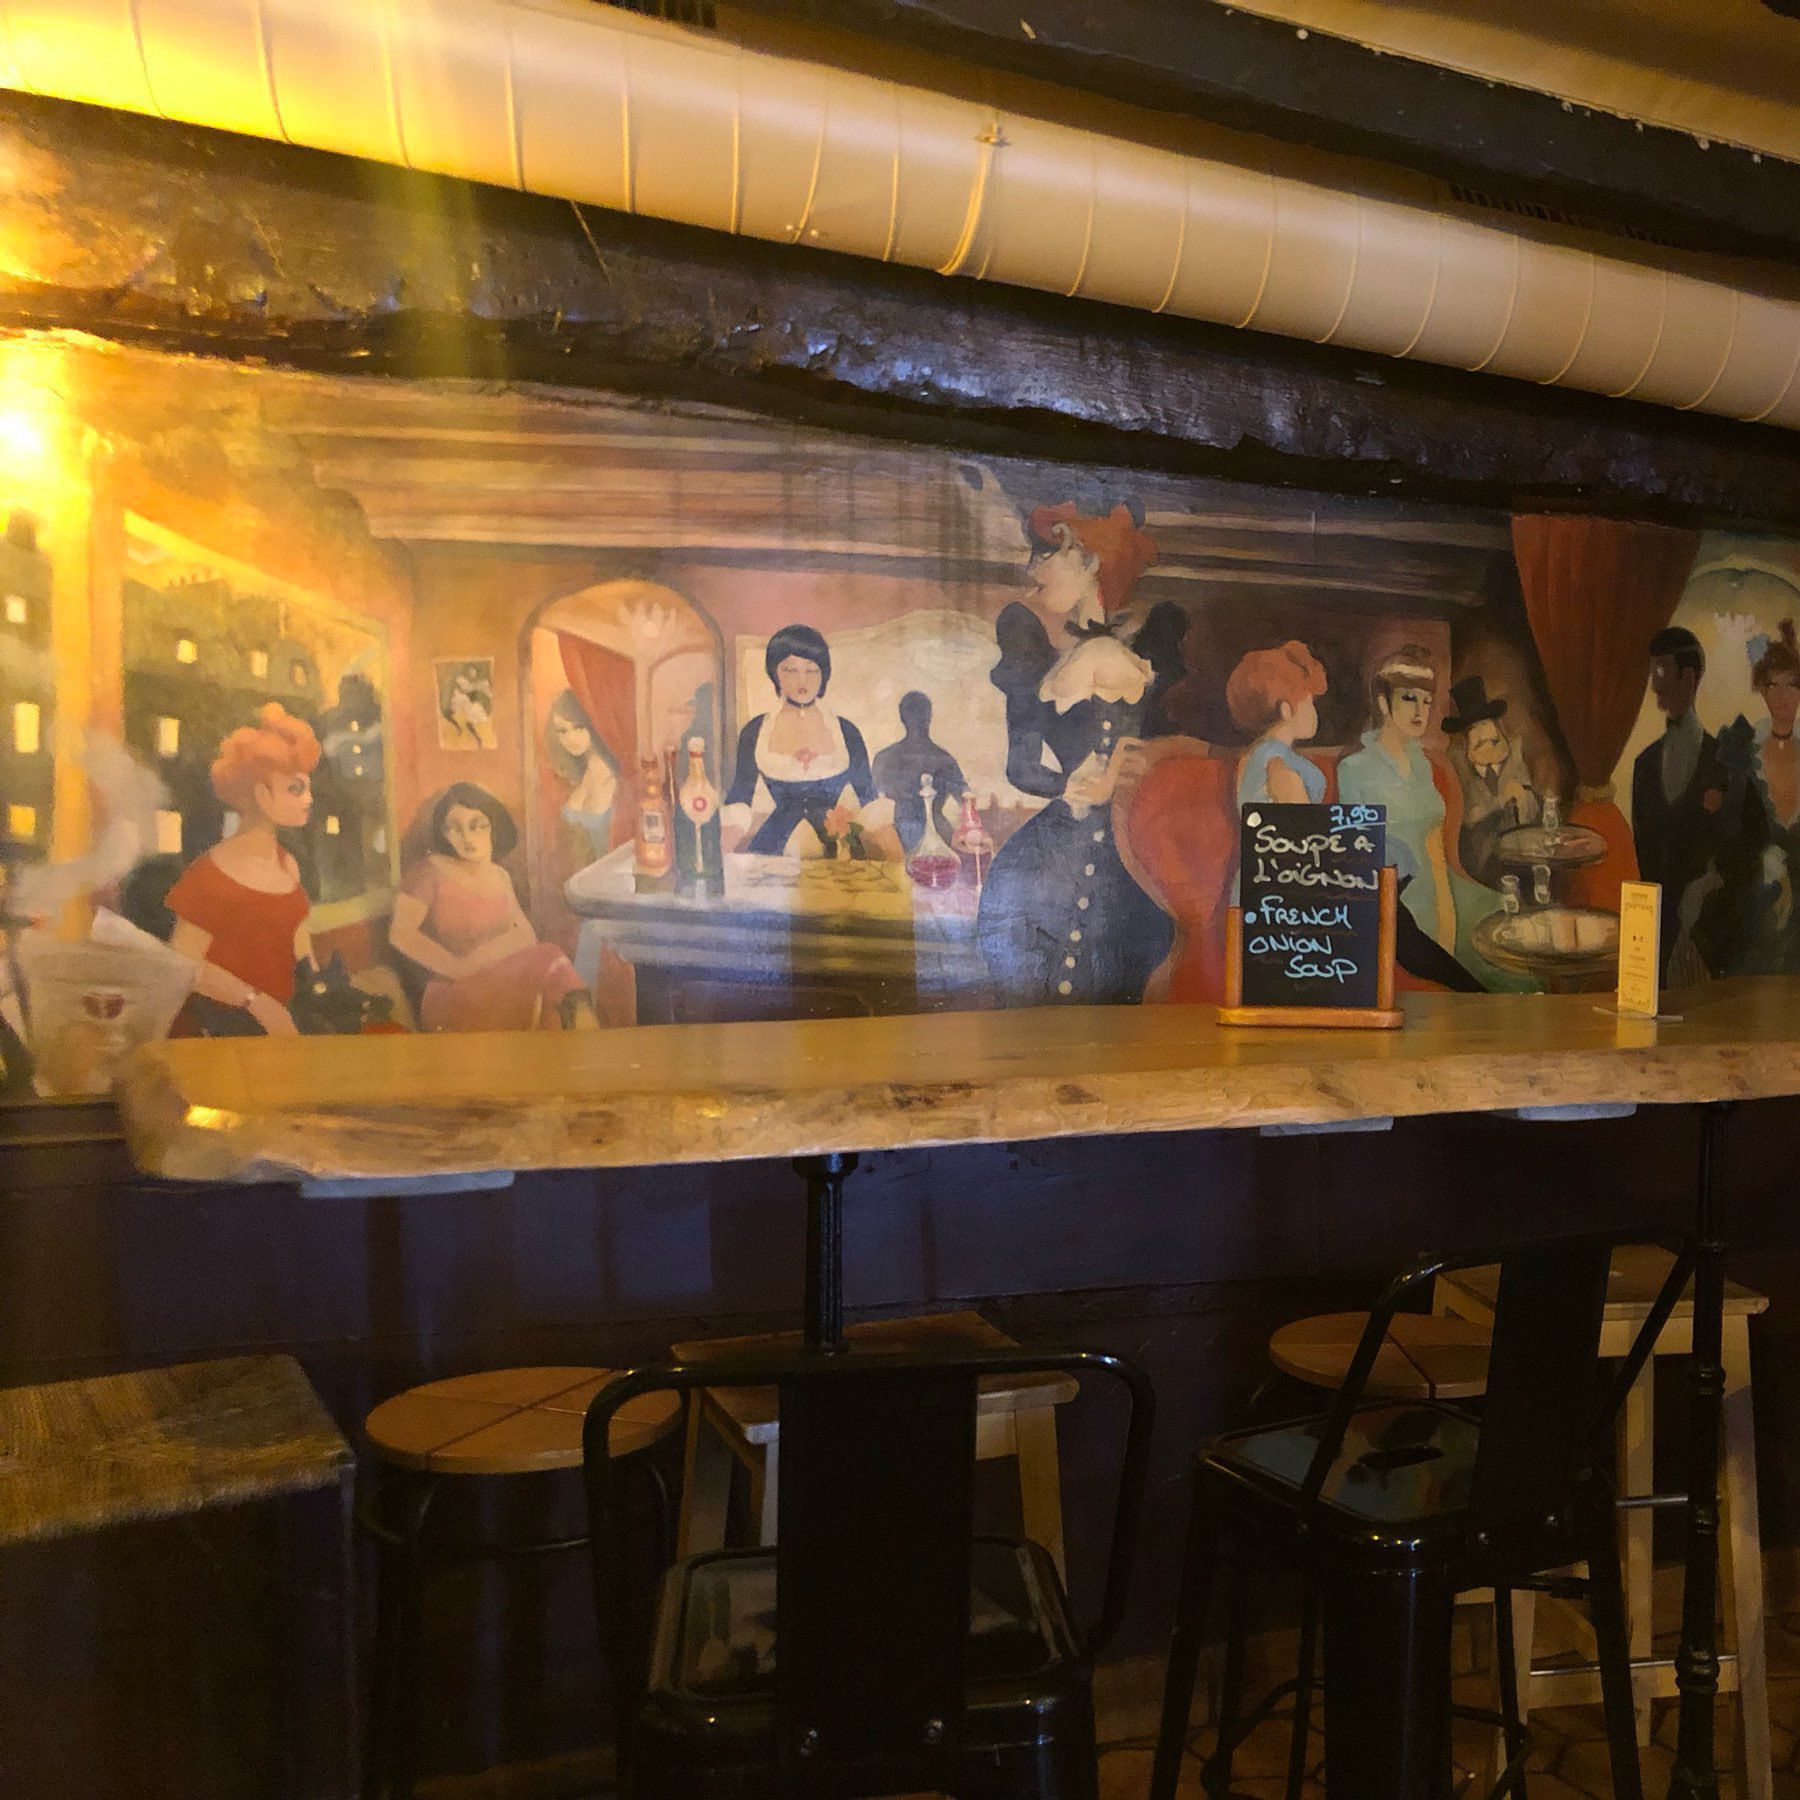 Interior picture of wall art depicting vintage French bar scene.